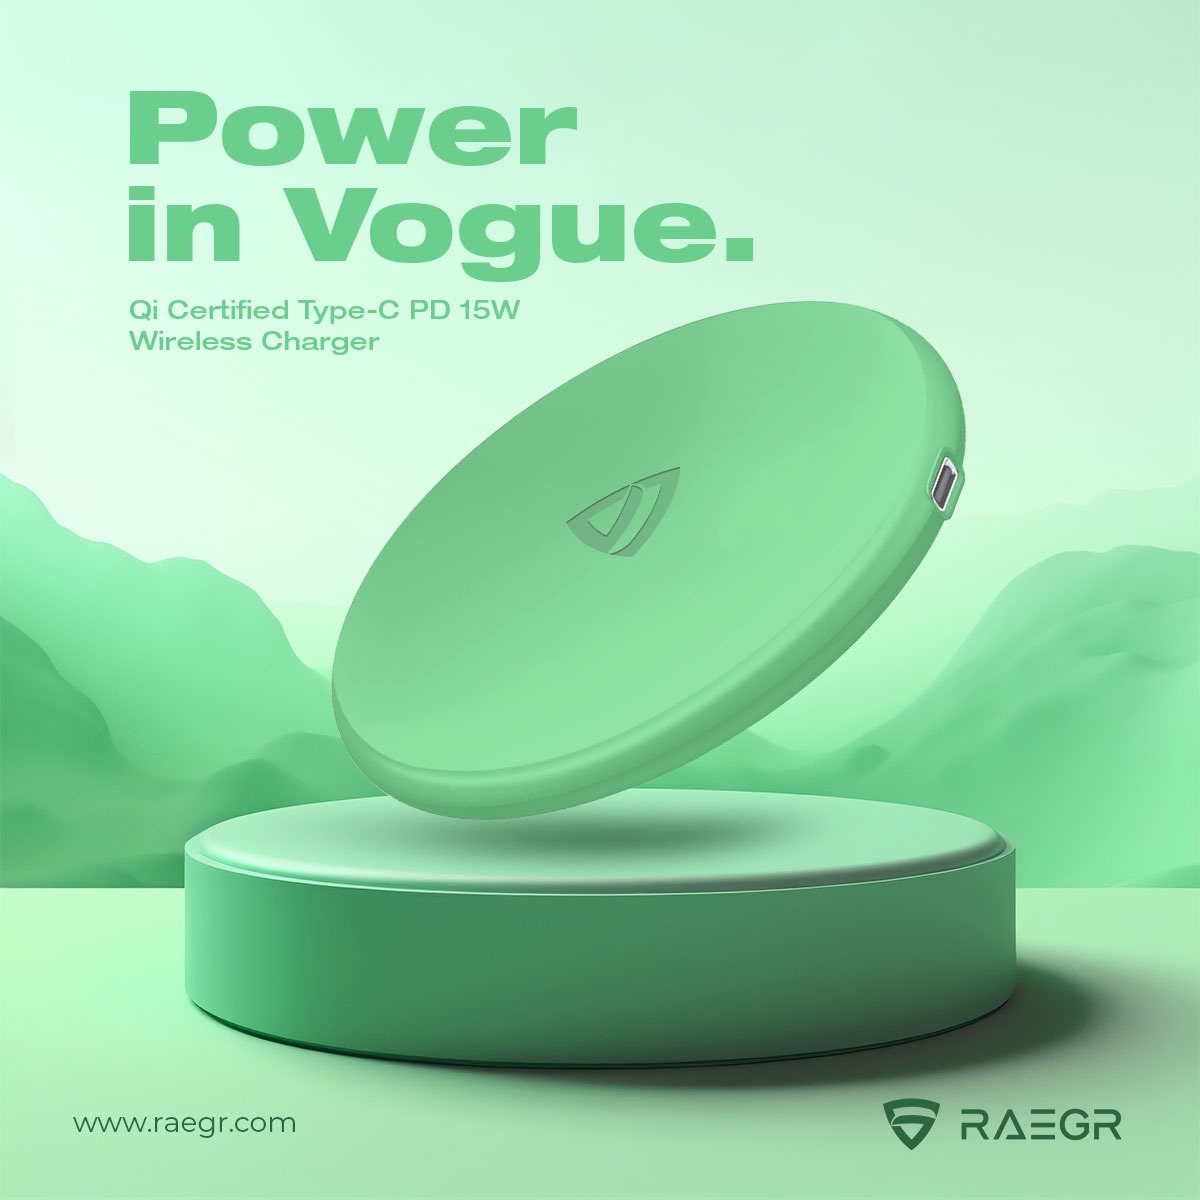 Slim, sleek, and stylish! Made in India, the RAEGR Arc 400 Pro 15W Type-C PD Qi-Certified Wireless Charger is the perfect solution.

Buy Now!
Raegr:postly.app/3Tcx
Tekkitake:postly.app/2V9P
Amazon:postly.app/2V9R

#RAEGR #Arc400Pro